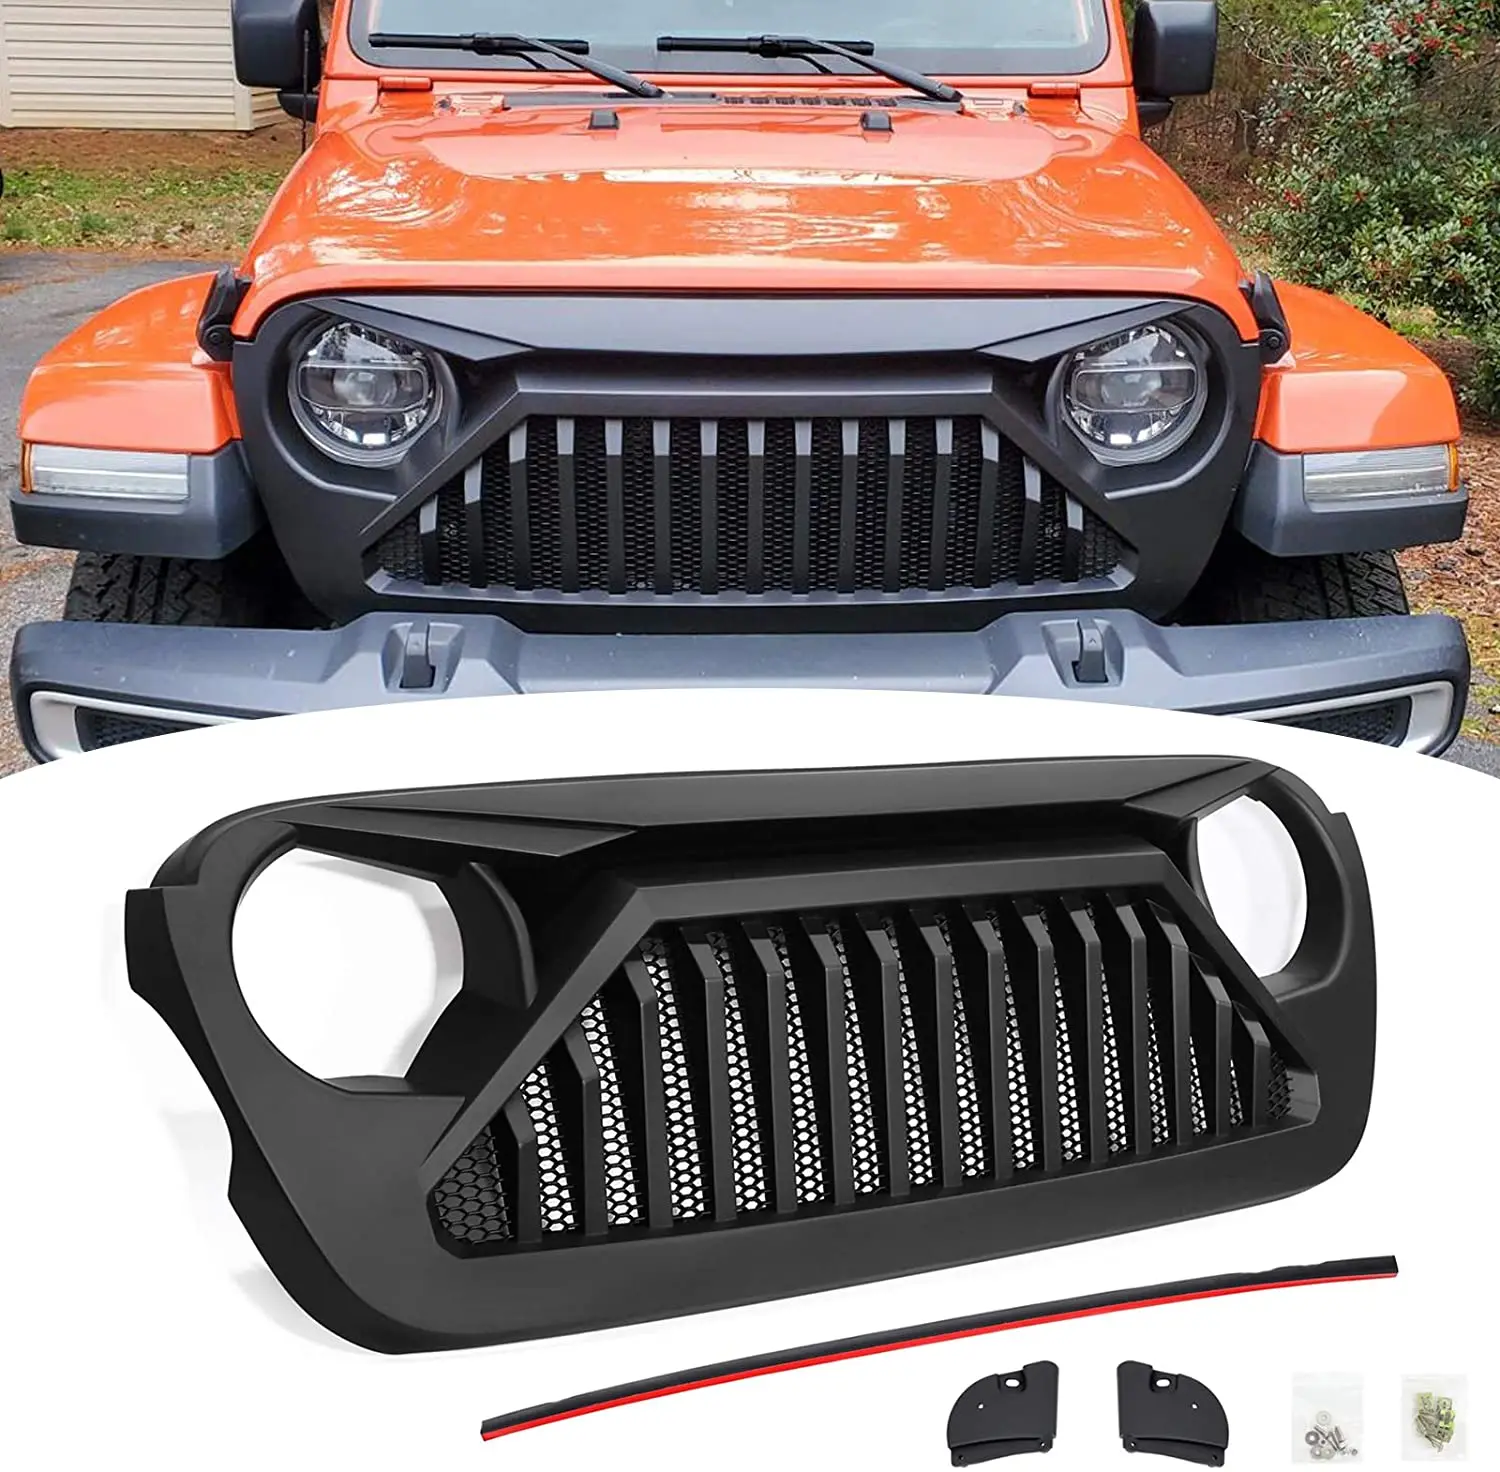 

Spedking 2018 2019 2020 2021 4x4 offroad accessories front bumper grill for JEEP WRANGLER JL JT